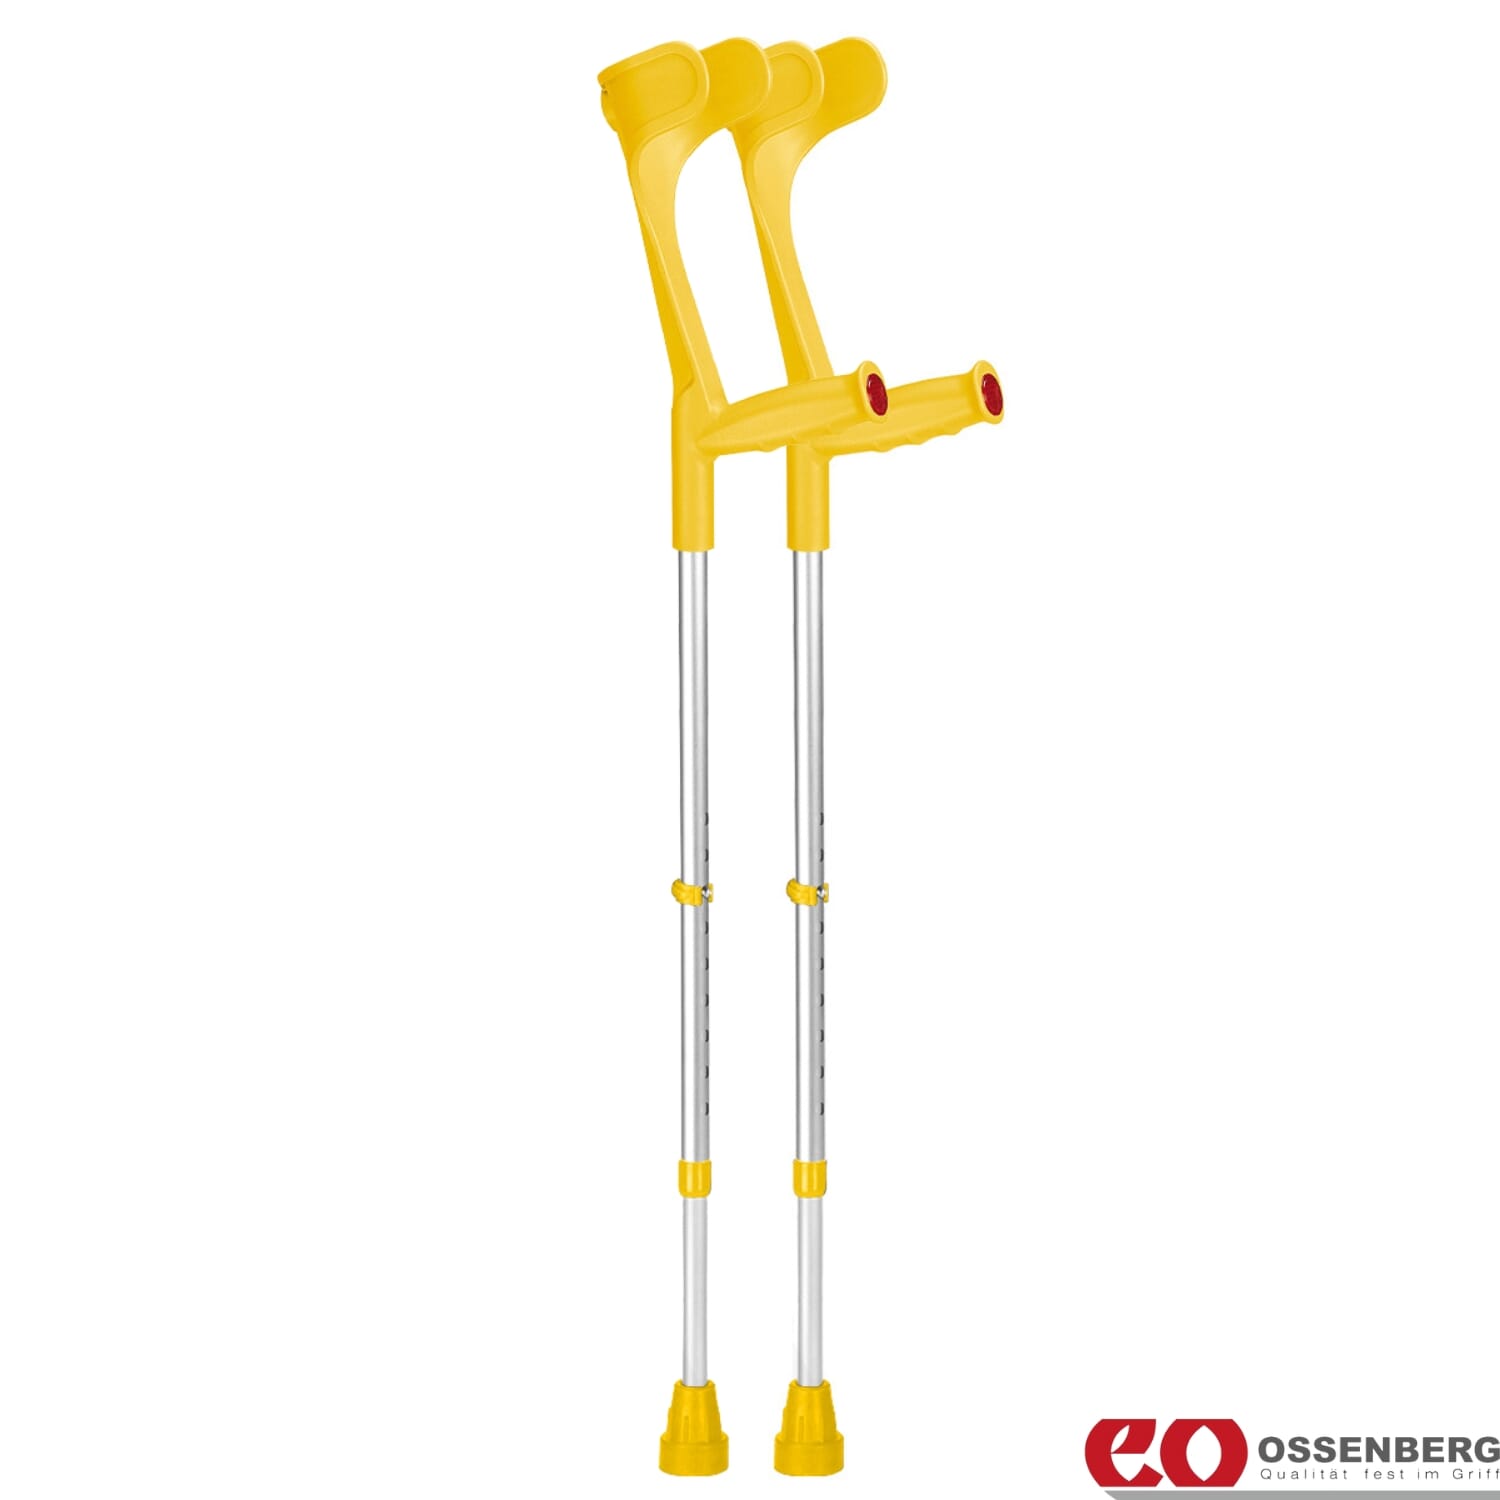 View Ossenberg Open Cuff Crutches Yellow Pair information